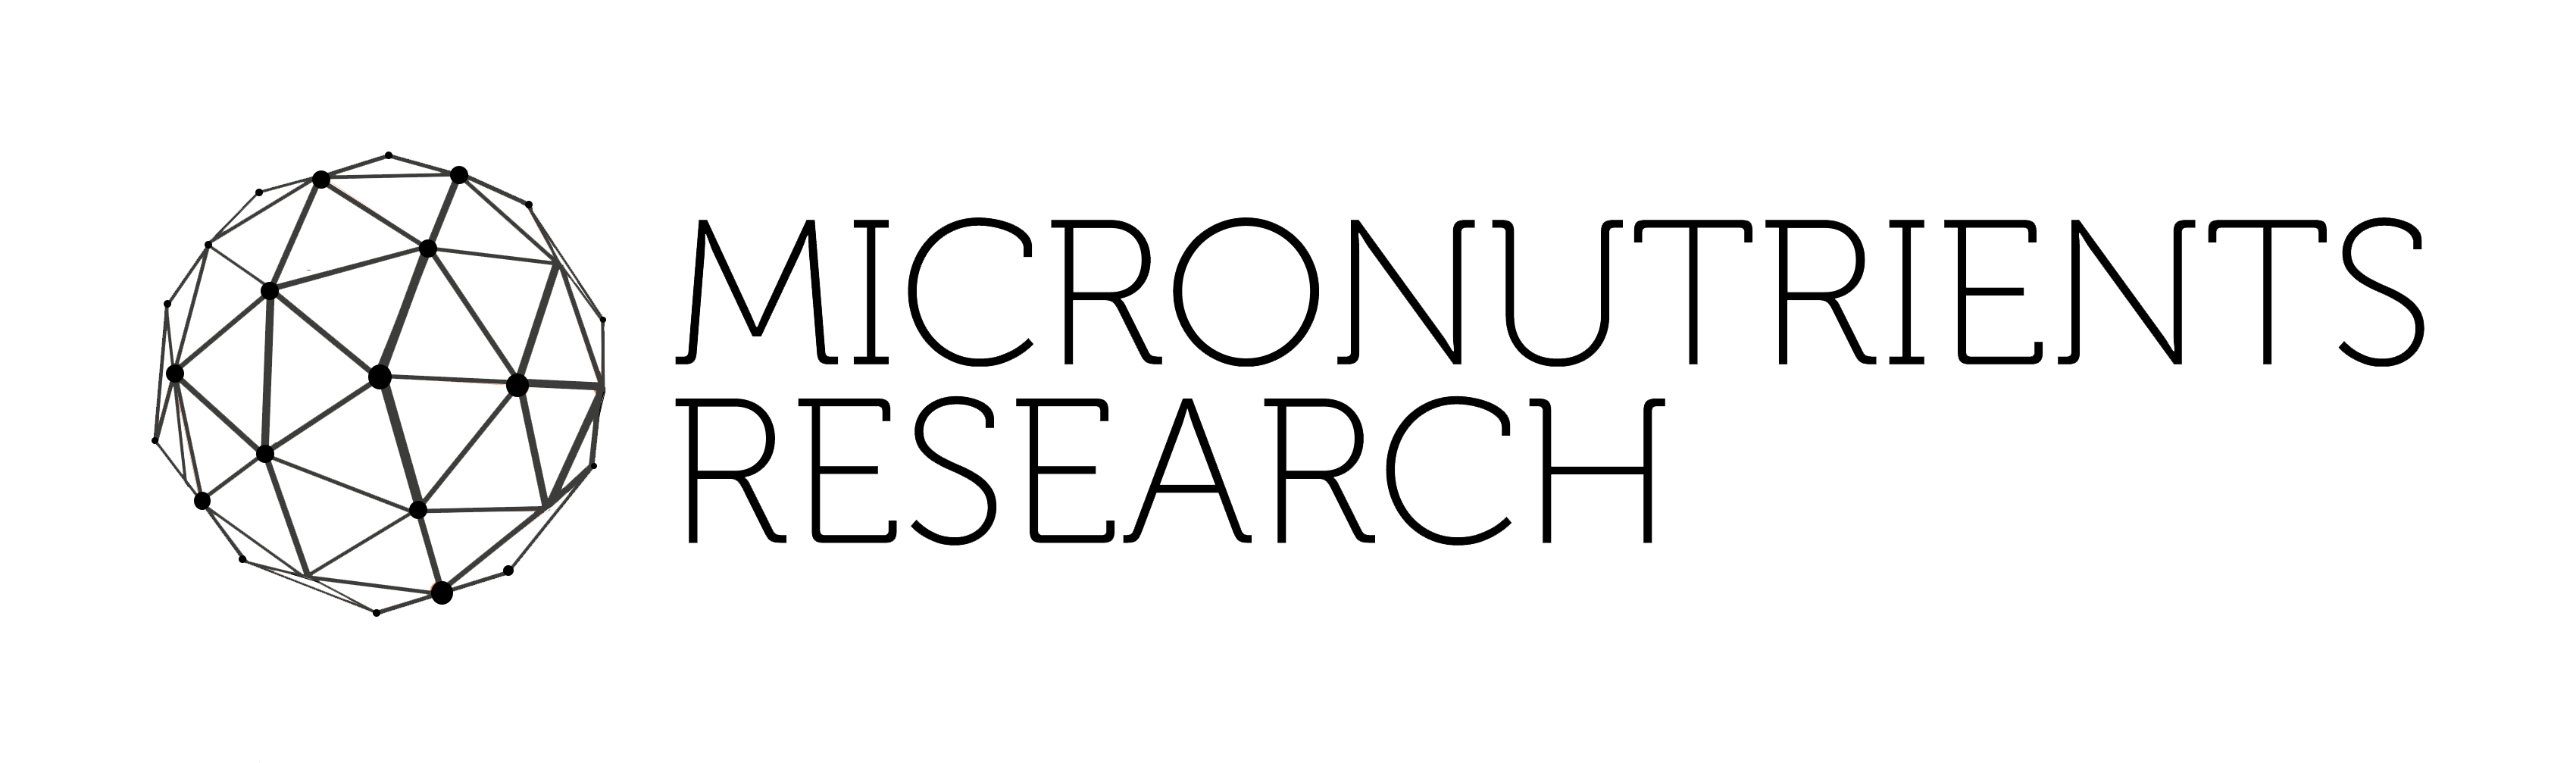 Micronutrients Research-